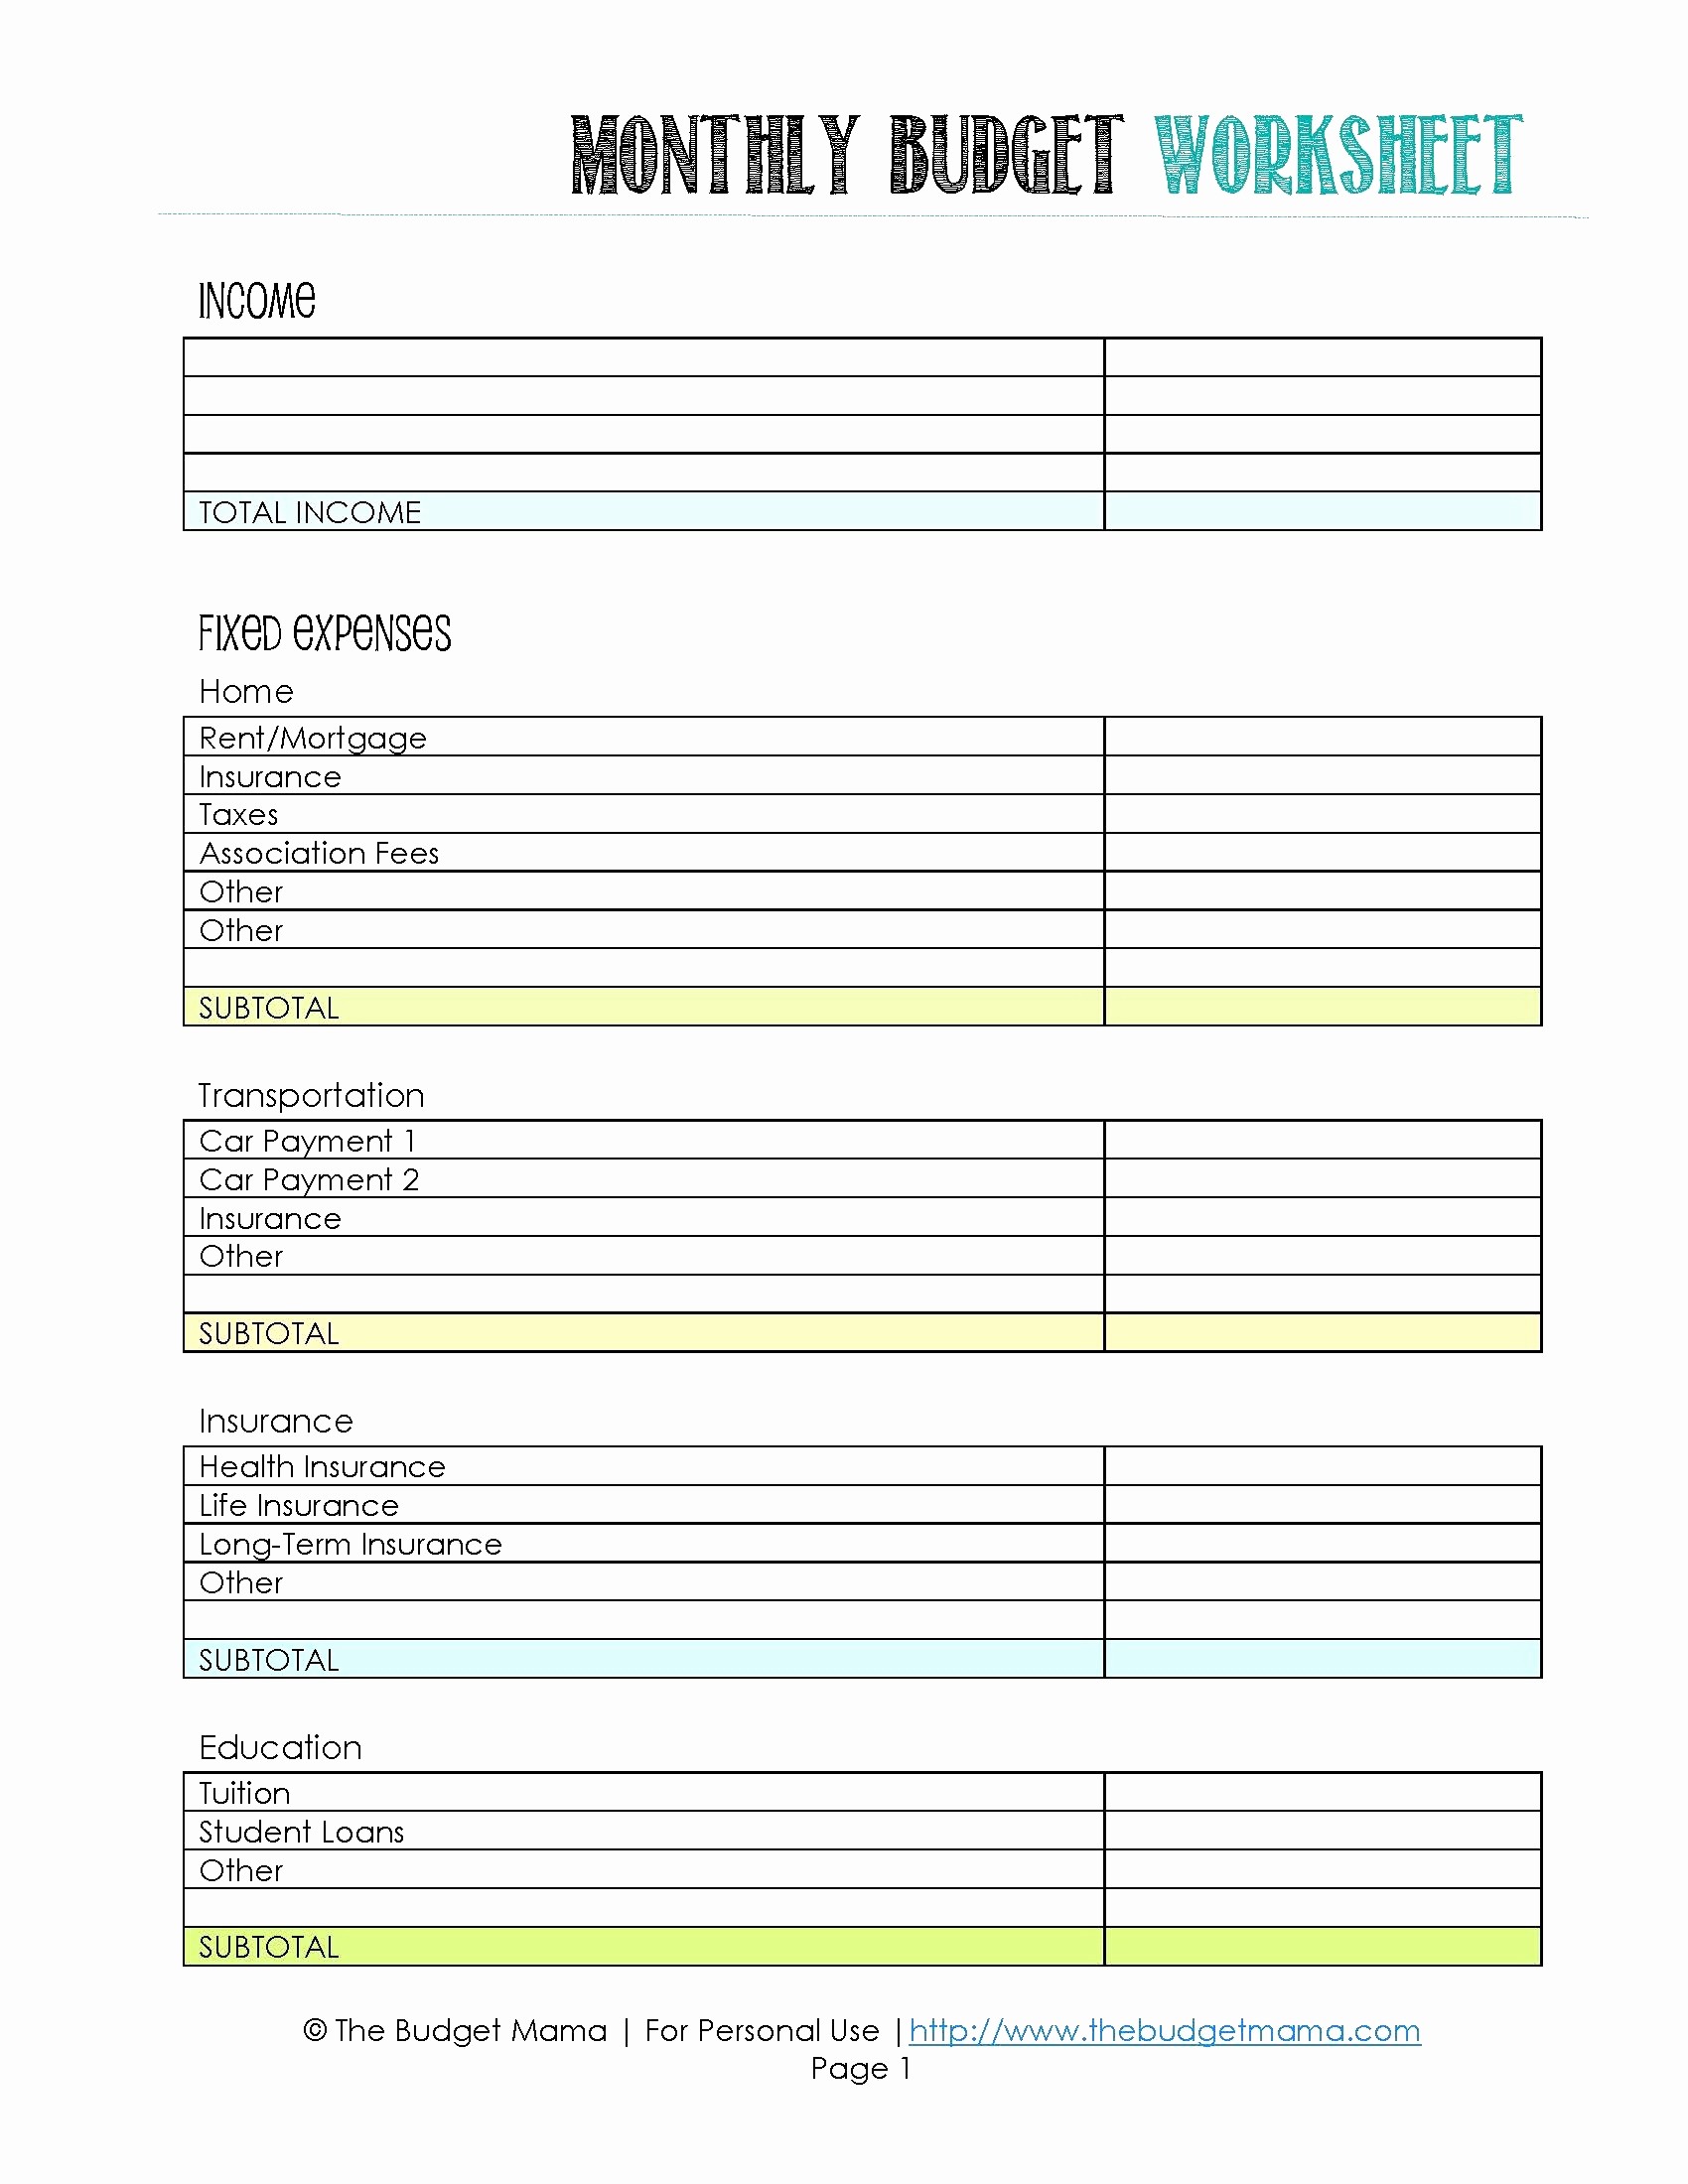 Donation Value Guide 2015 Spreadsheet Lovely Valuation Donated Document